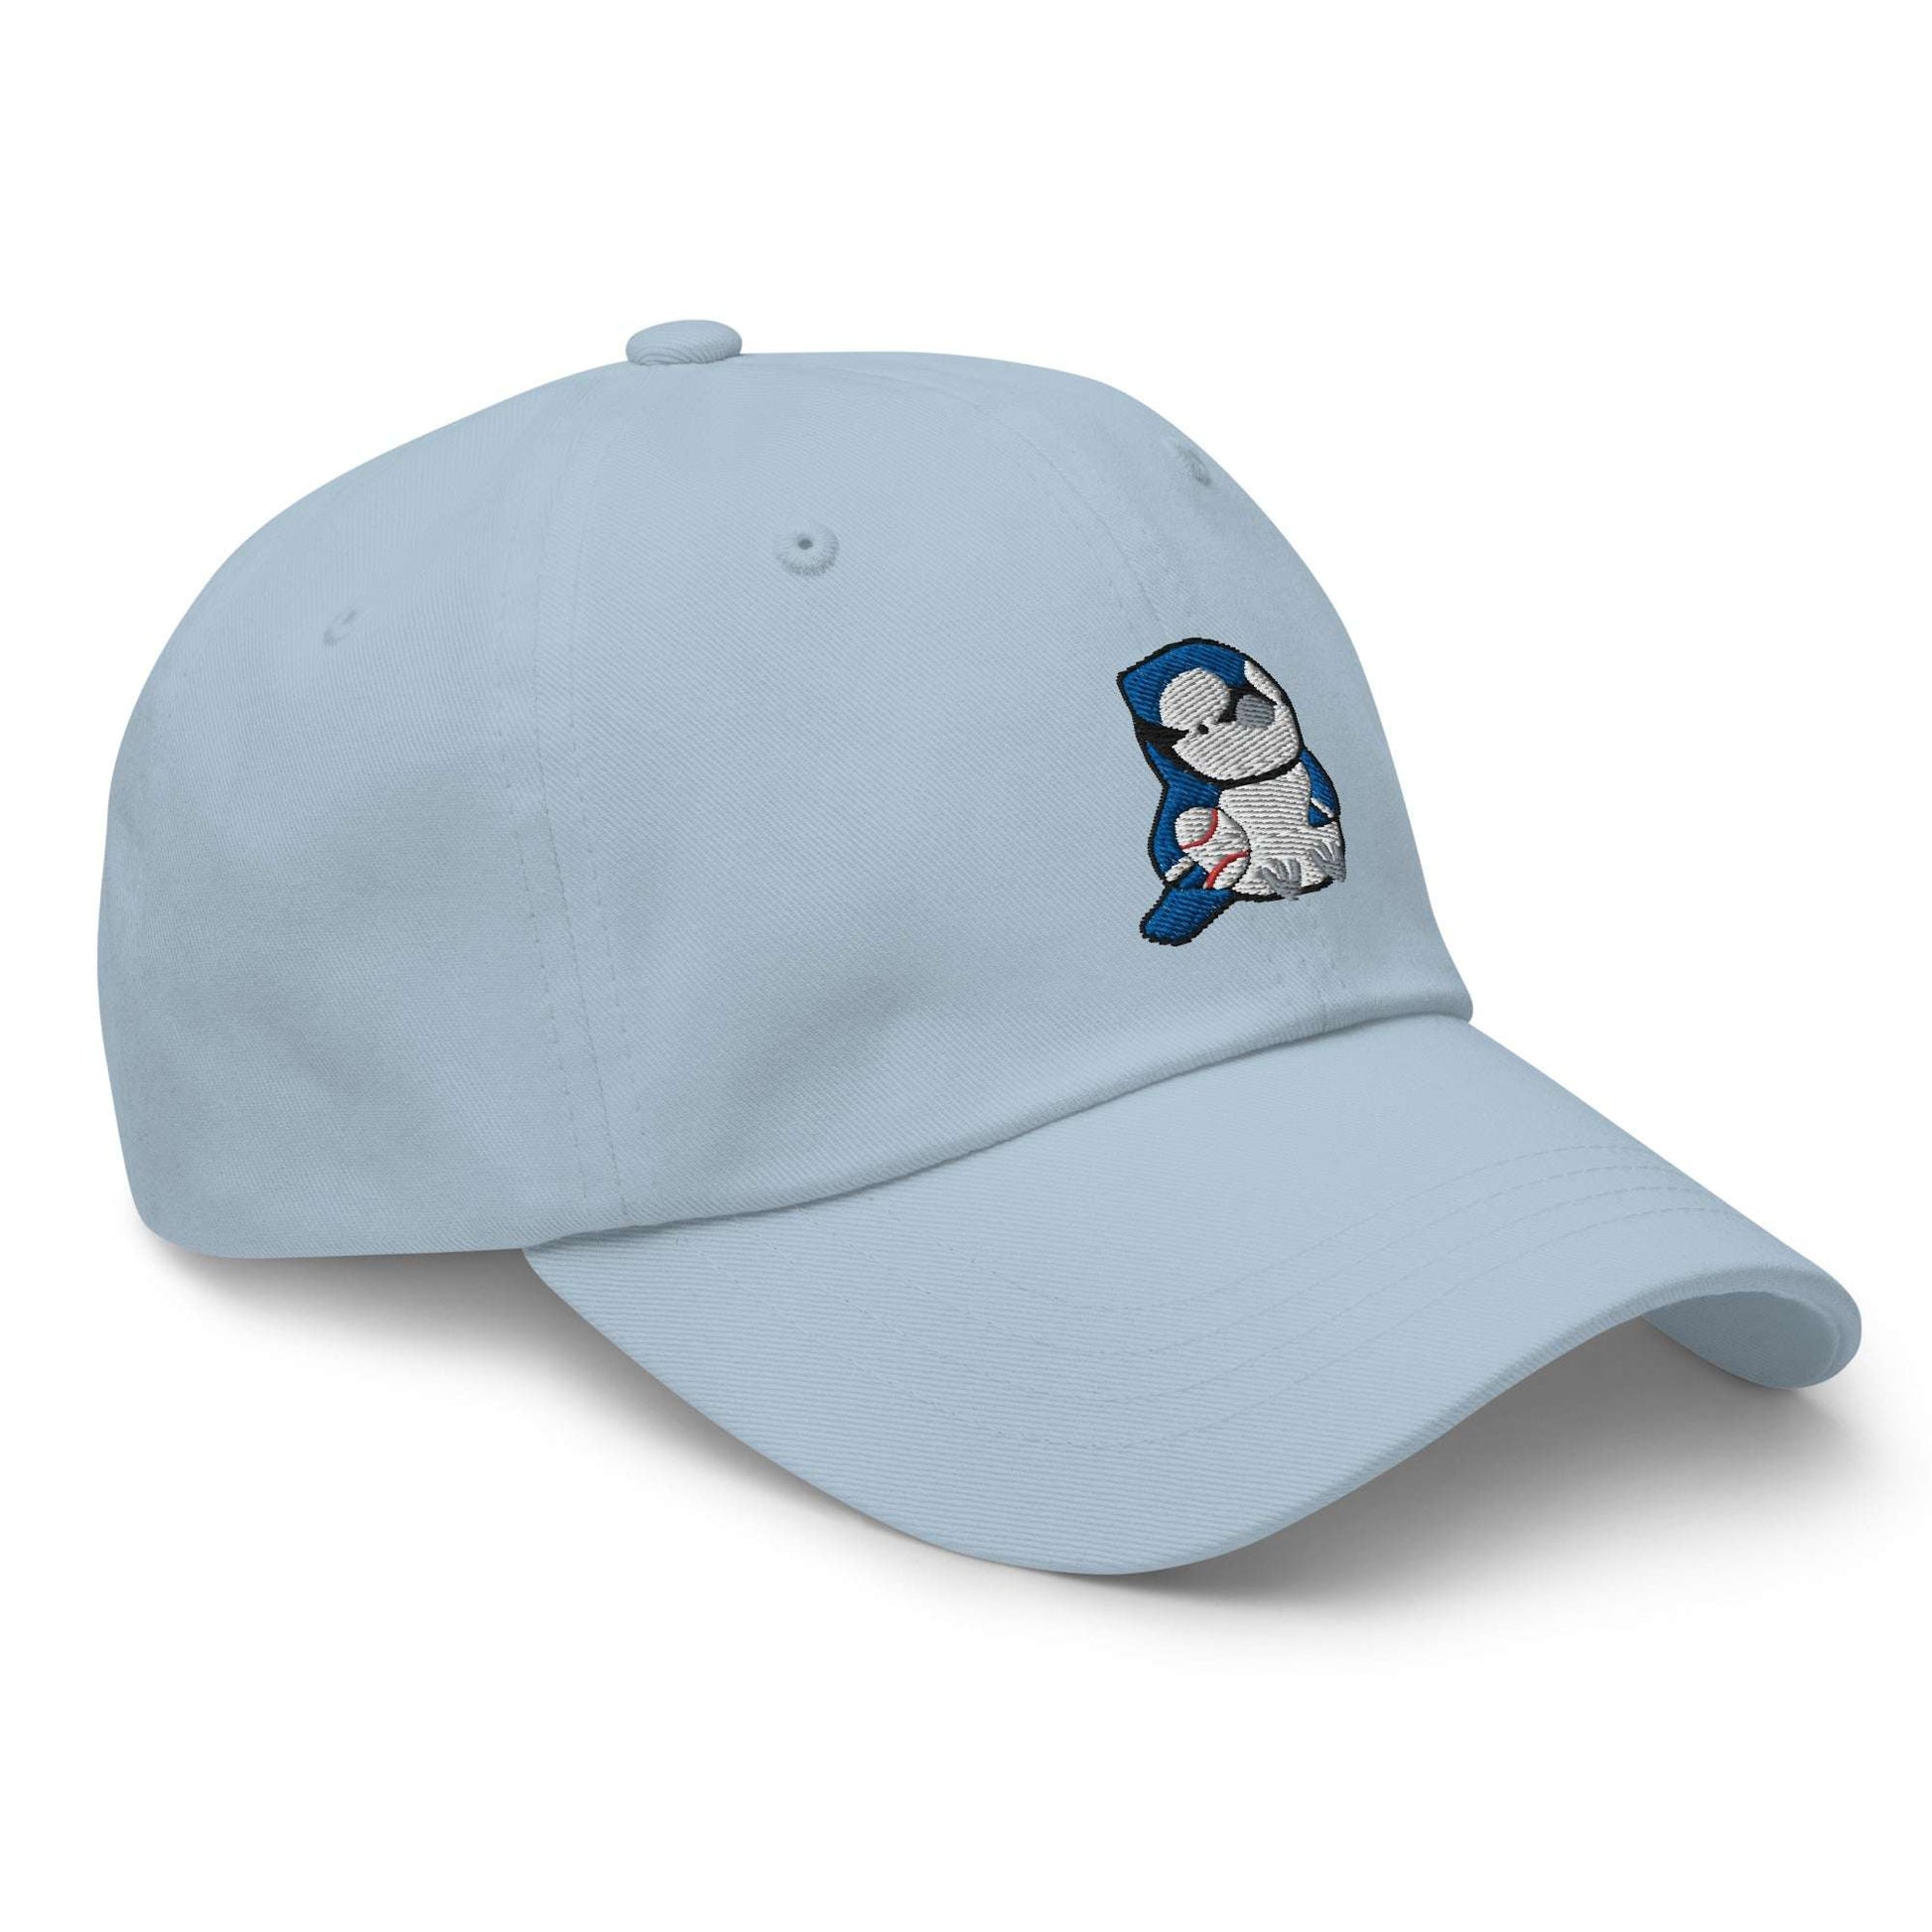 Embroidered Blue Jay Baseball Cap